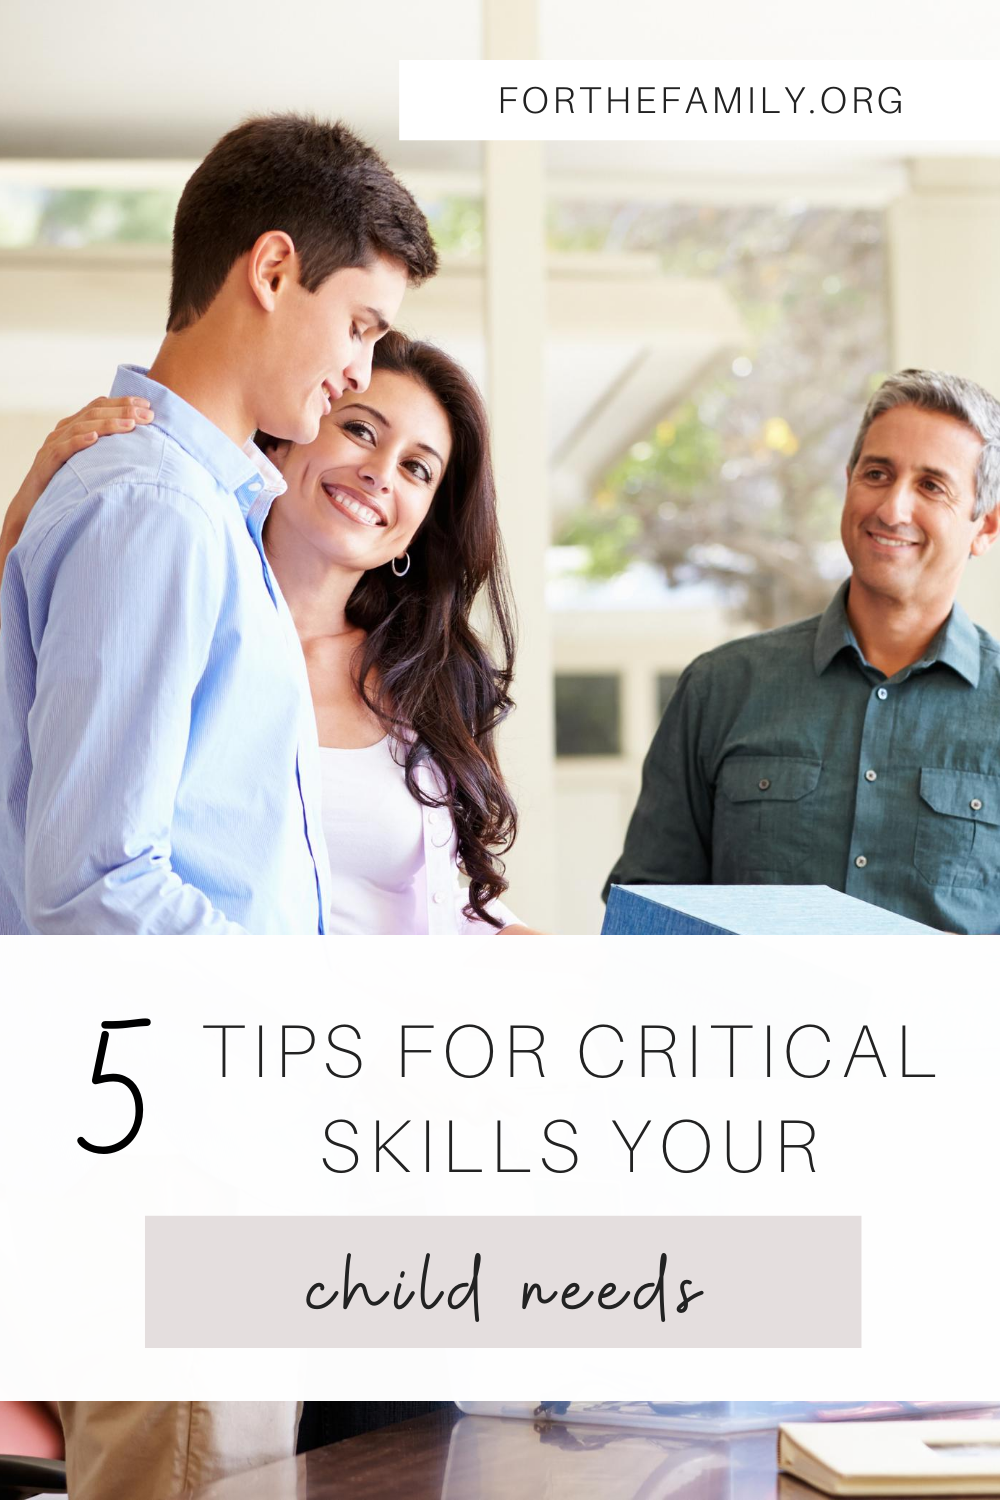 5 Tips for Critical Skills Your Child Needs